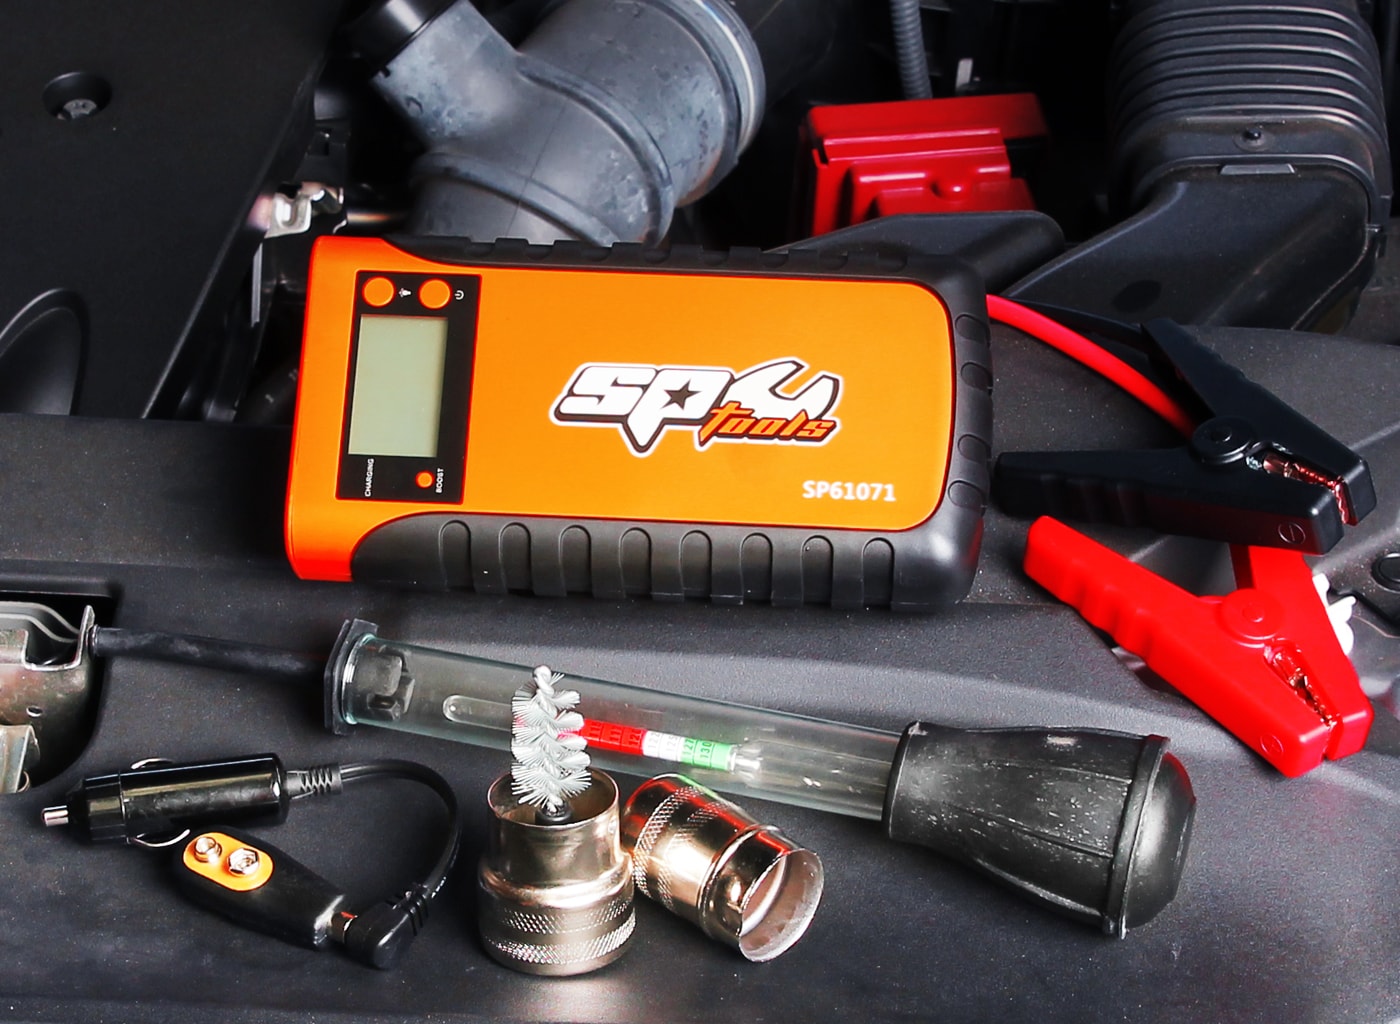 Battery Service Kit - SP60000 by SP Tools